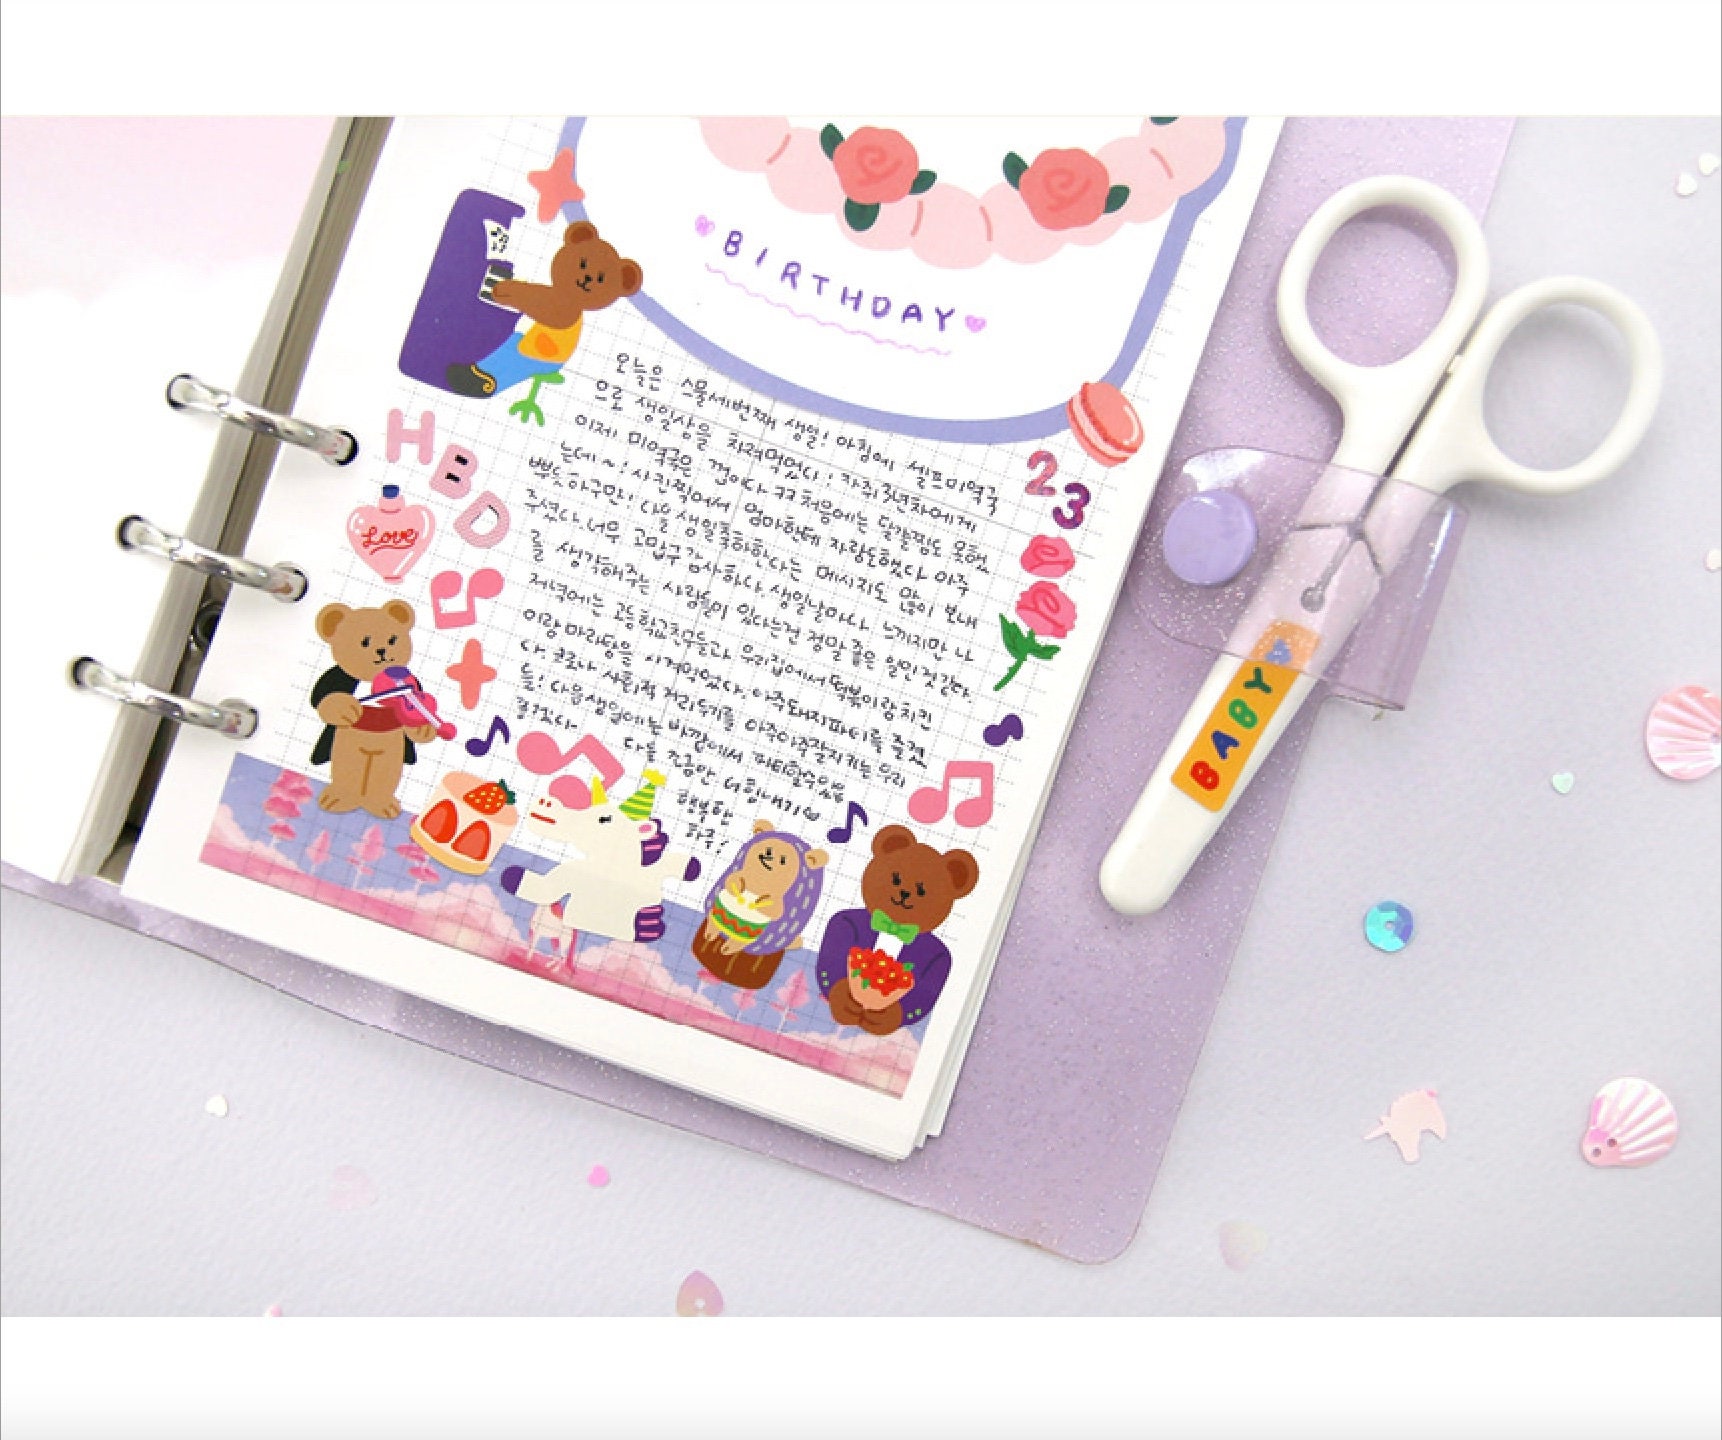 Cute Essential Kawaii Aesthetic Stationery Sticker Pack 9 Sheets (160+  Stickers) - for Planners, journals, scrapbooks, Gifts, Kpop photocards